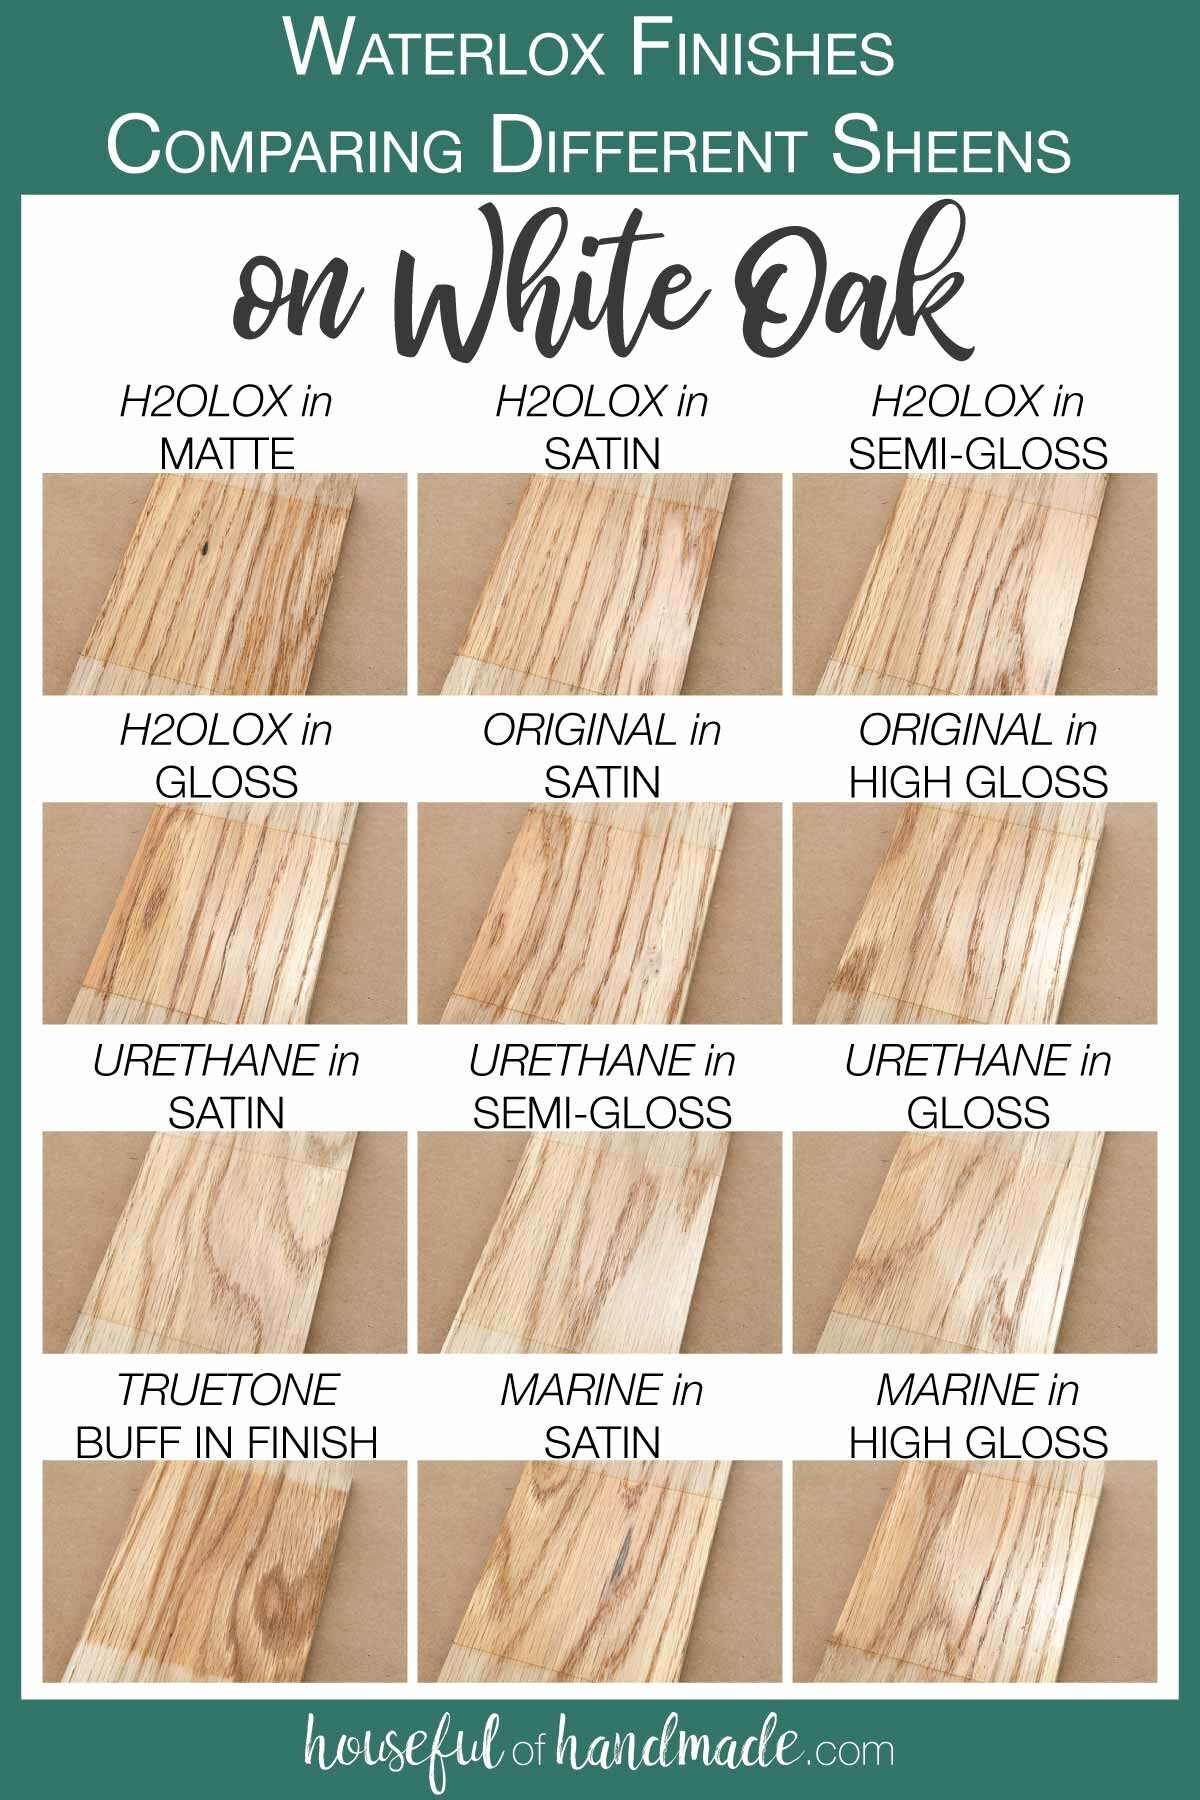 12 samples of the different sheens of all the Waterlox finishes on White Oak boards. 